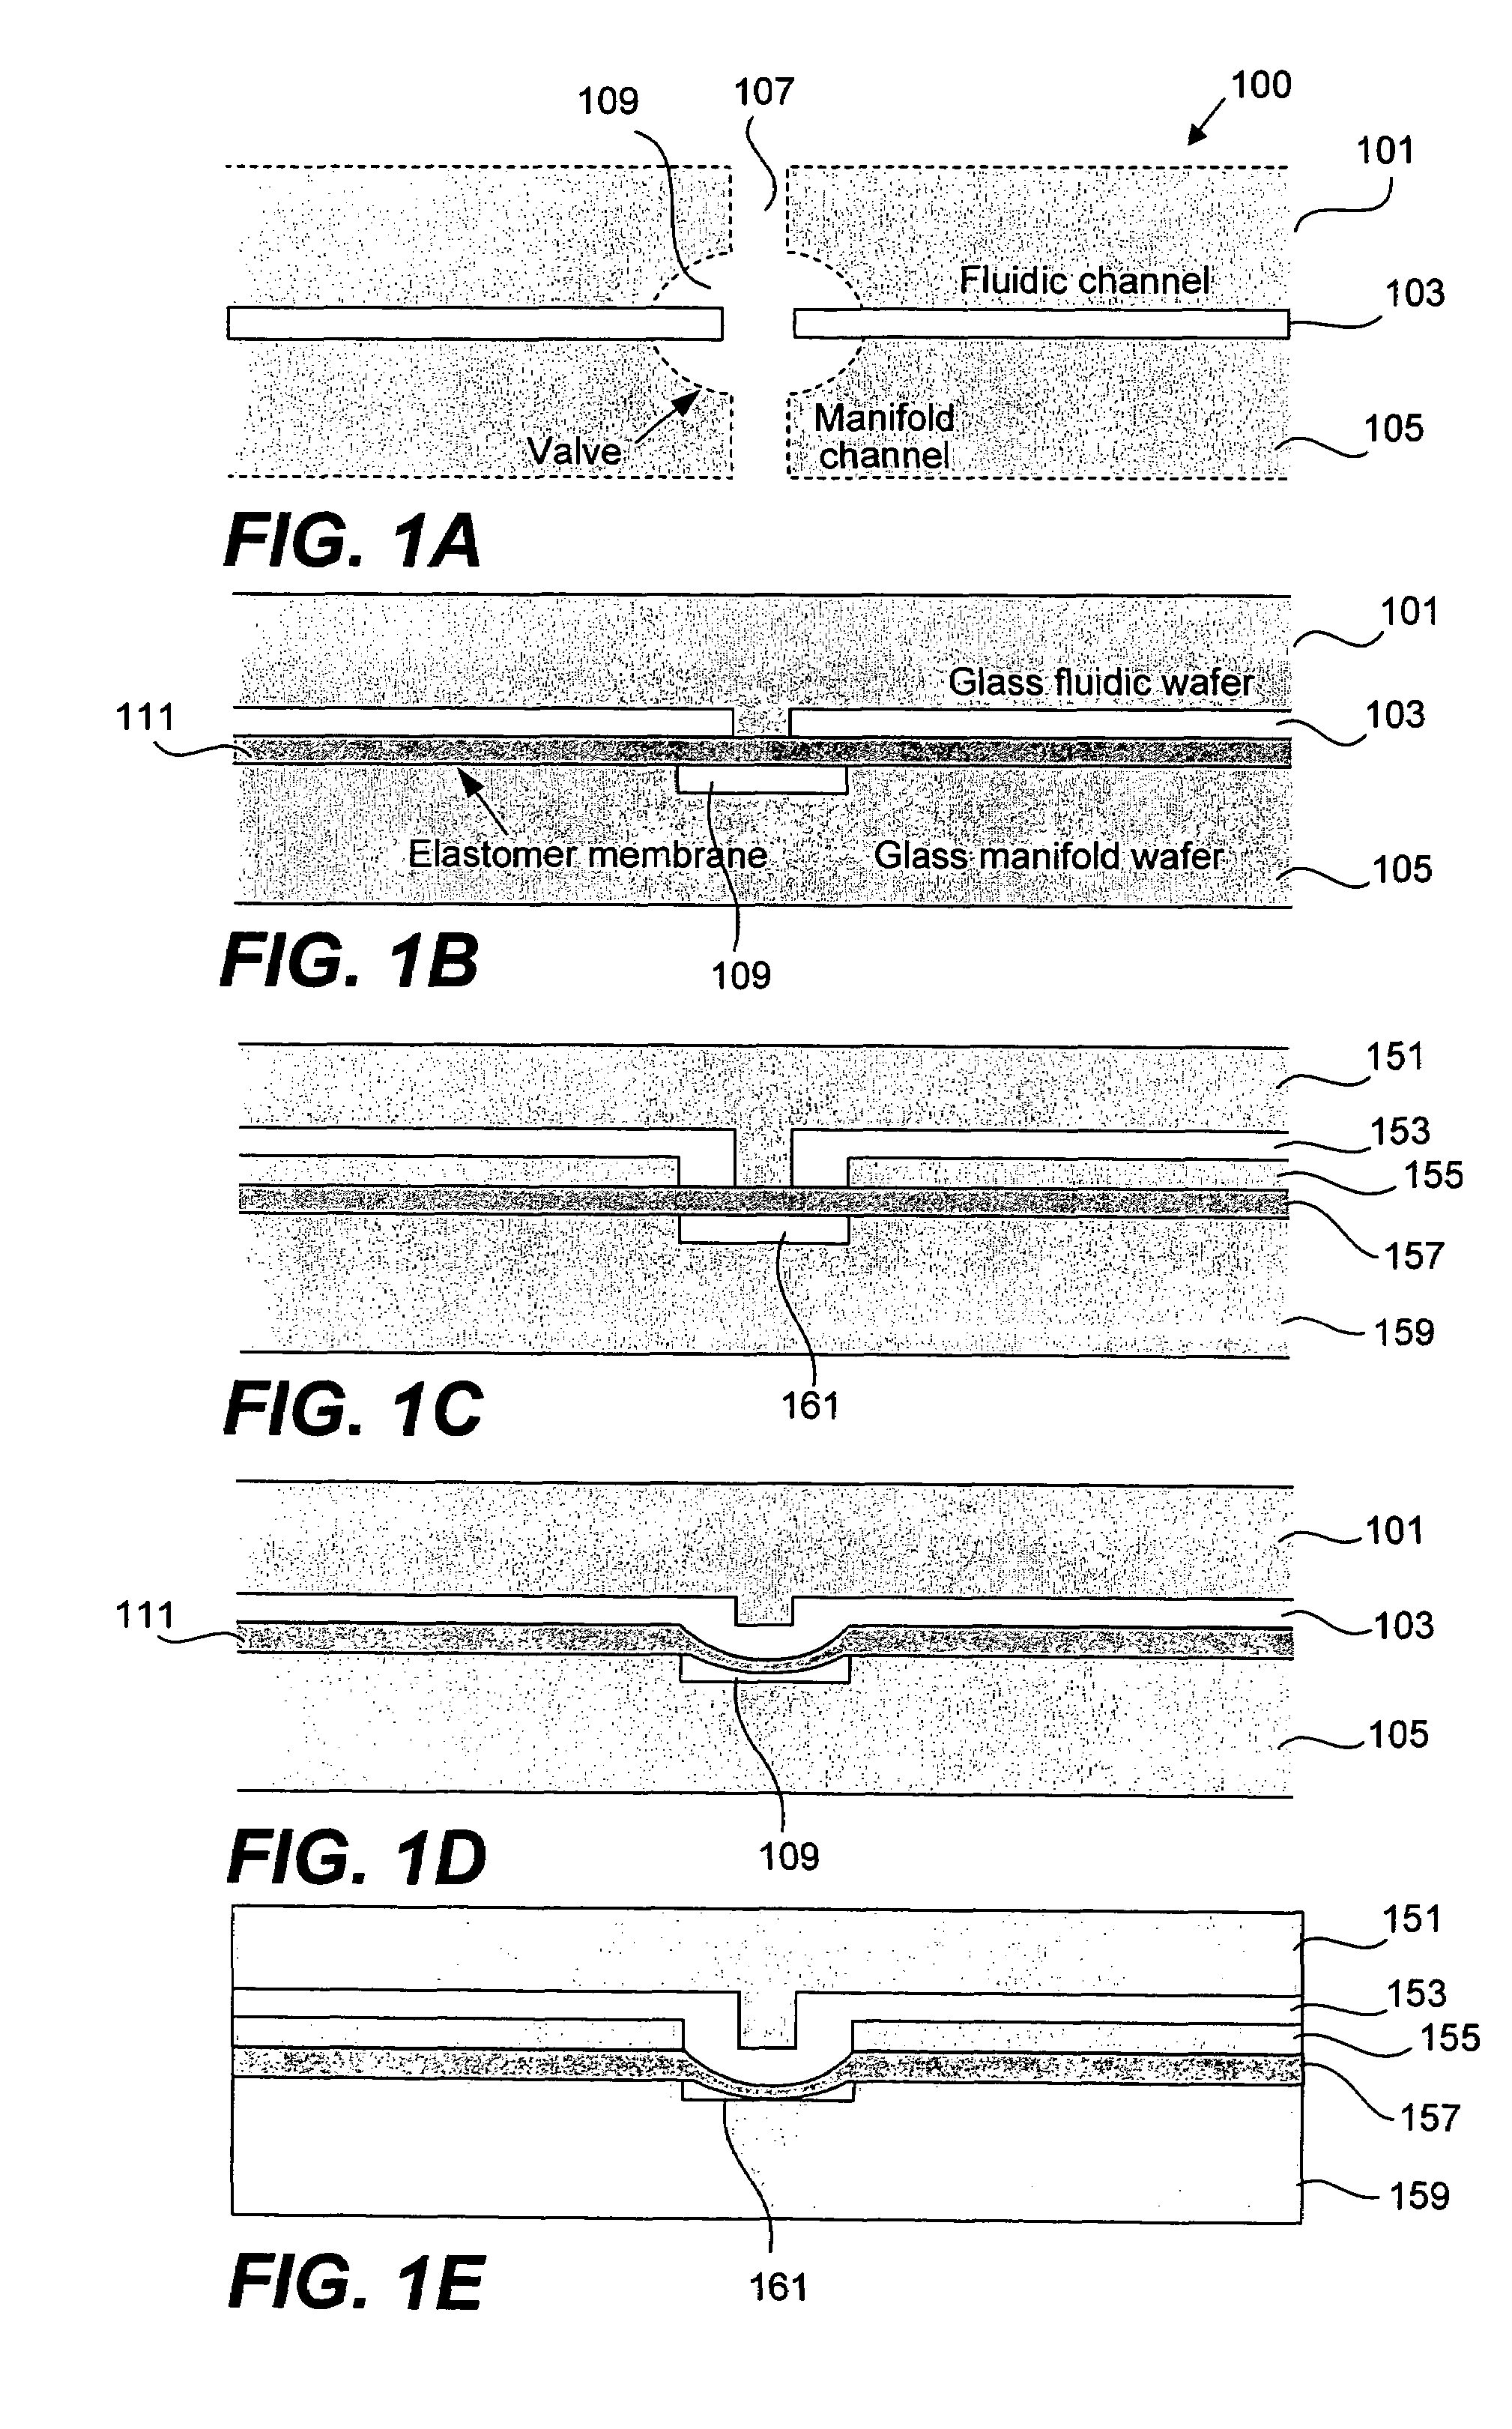 Fluid control structures in microfluidic devices